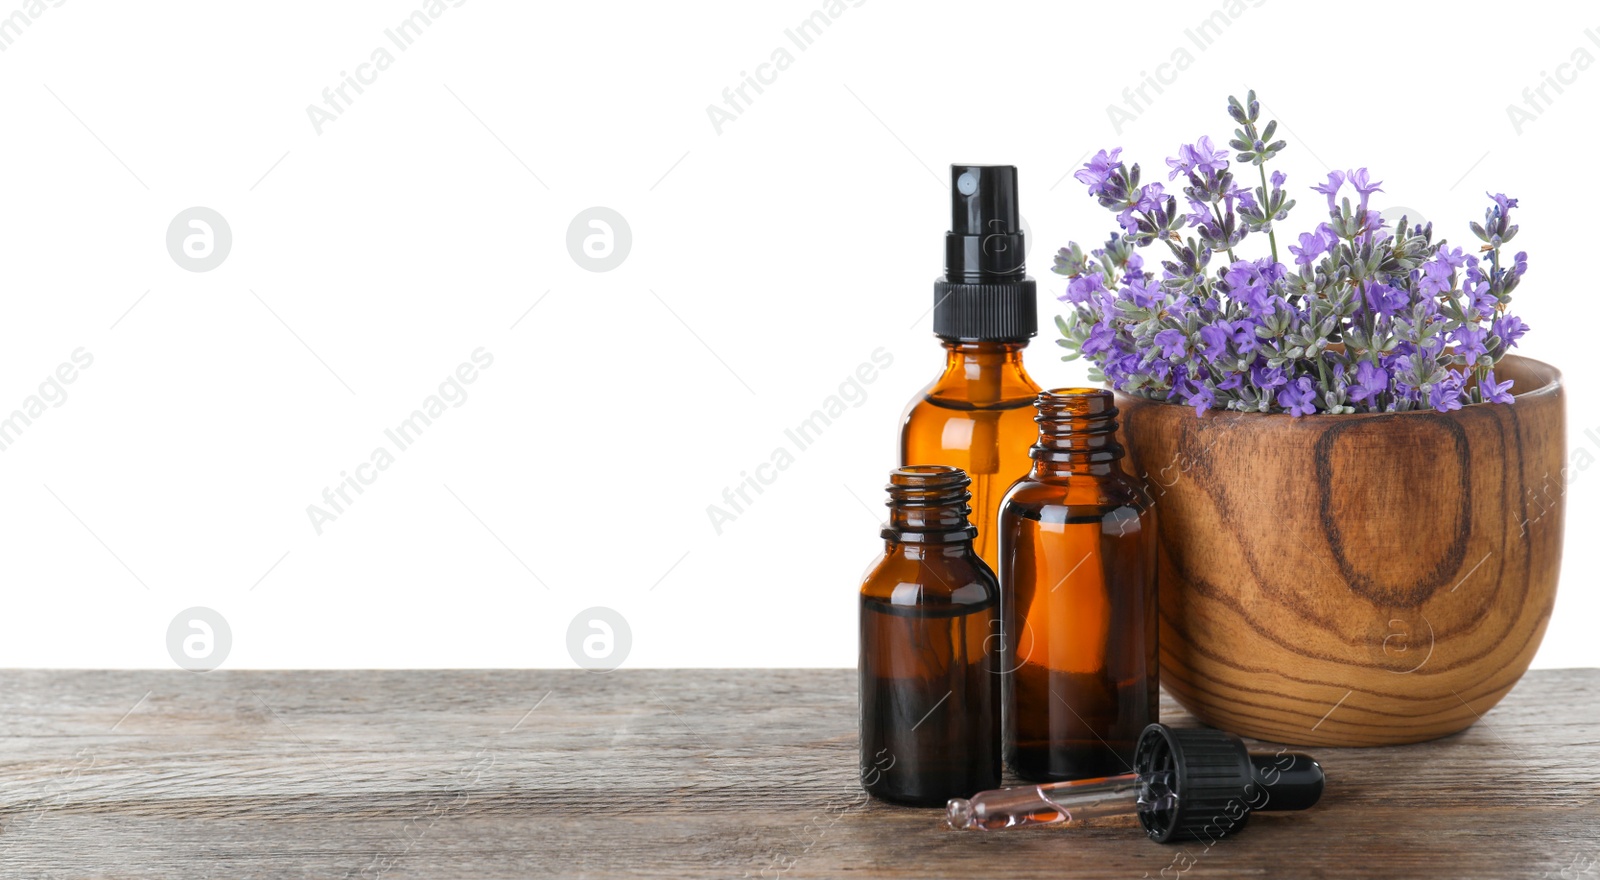 Photo of Bottles of essential oil and bowl with lavender flowers on wooden table against white background